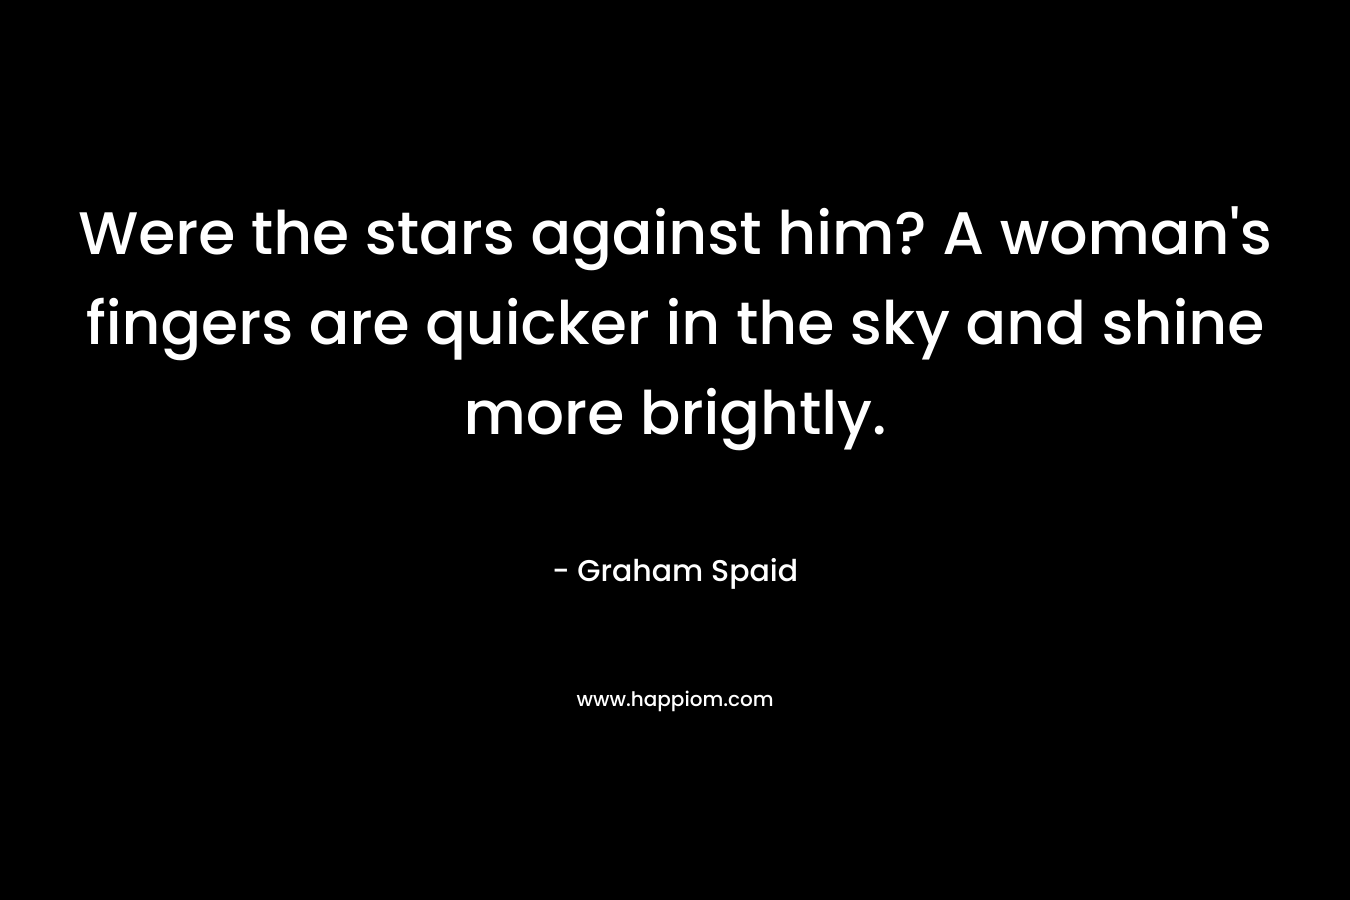 Were the stars against him? A woman’s fingers are quicker in the sky and shine more brightly. – Graham Spaid